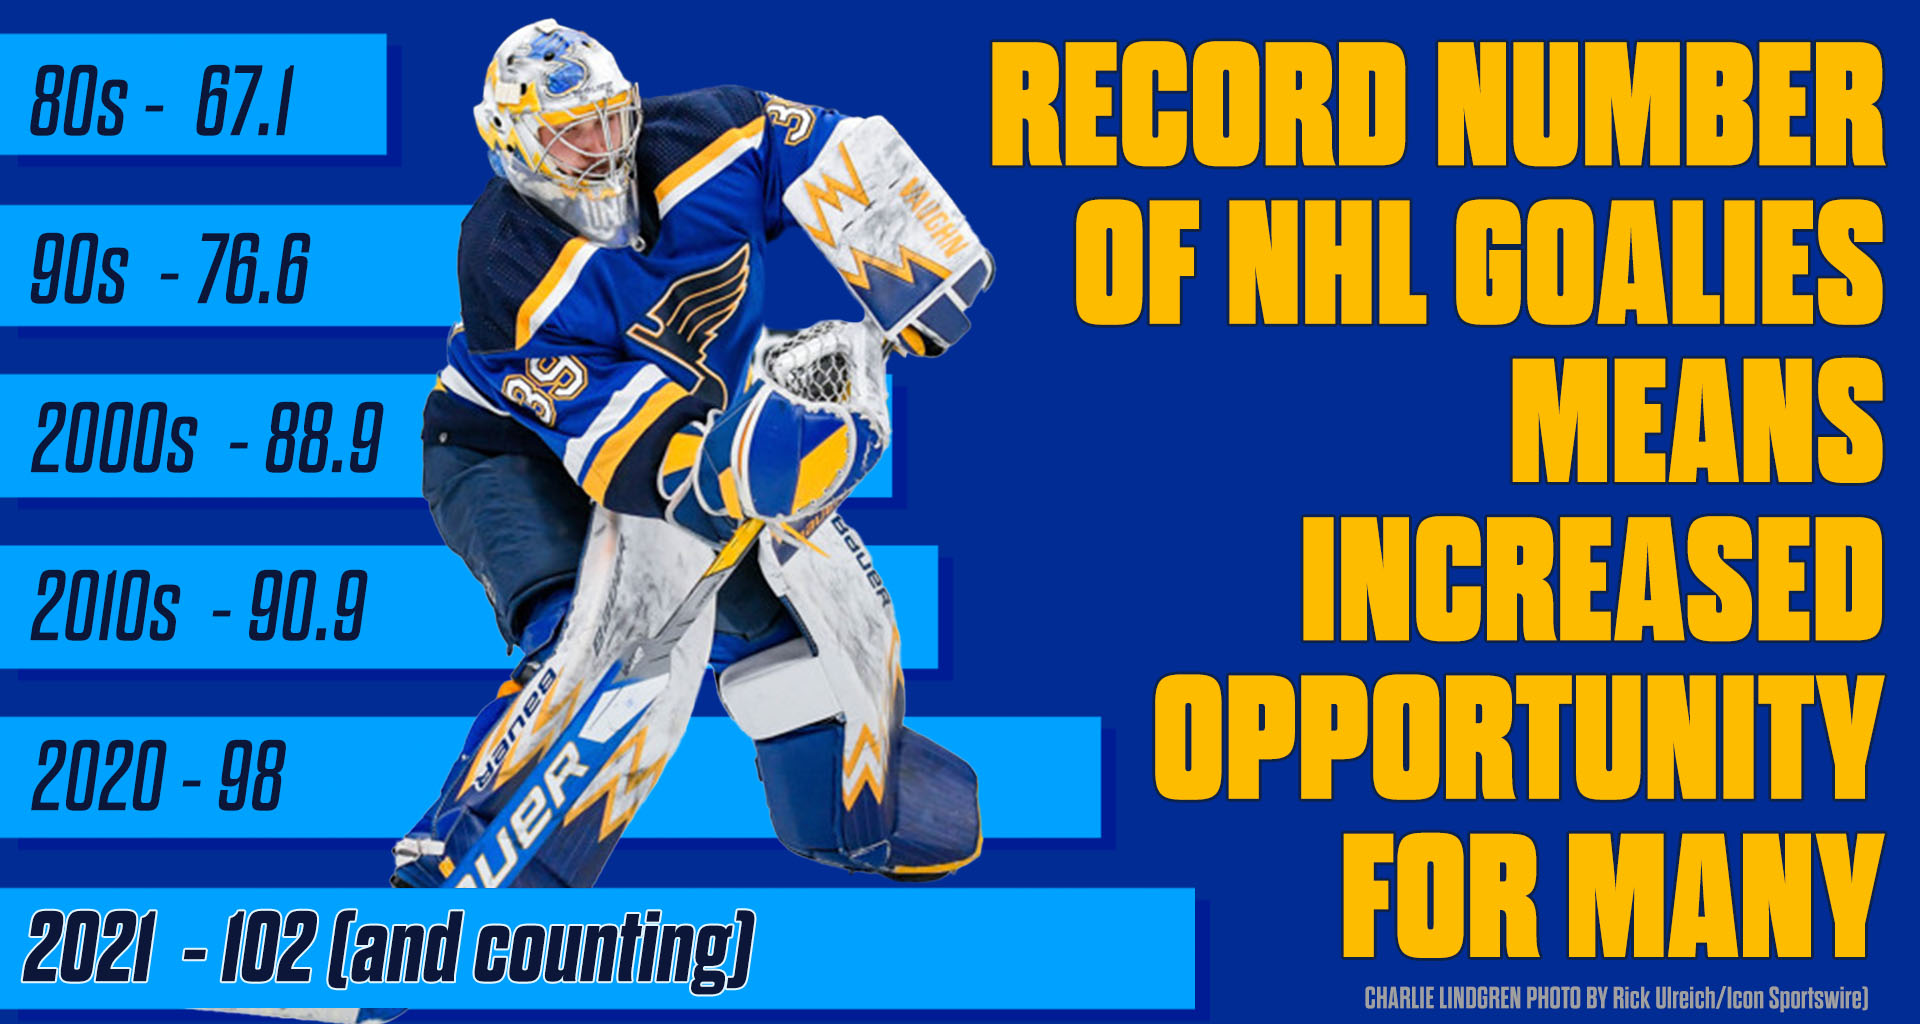 Record number of NHL goalies means increased opportunity for many